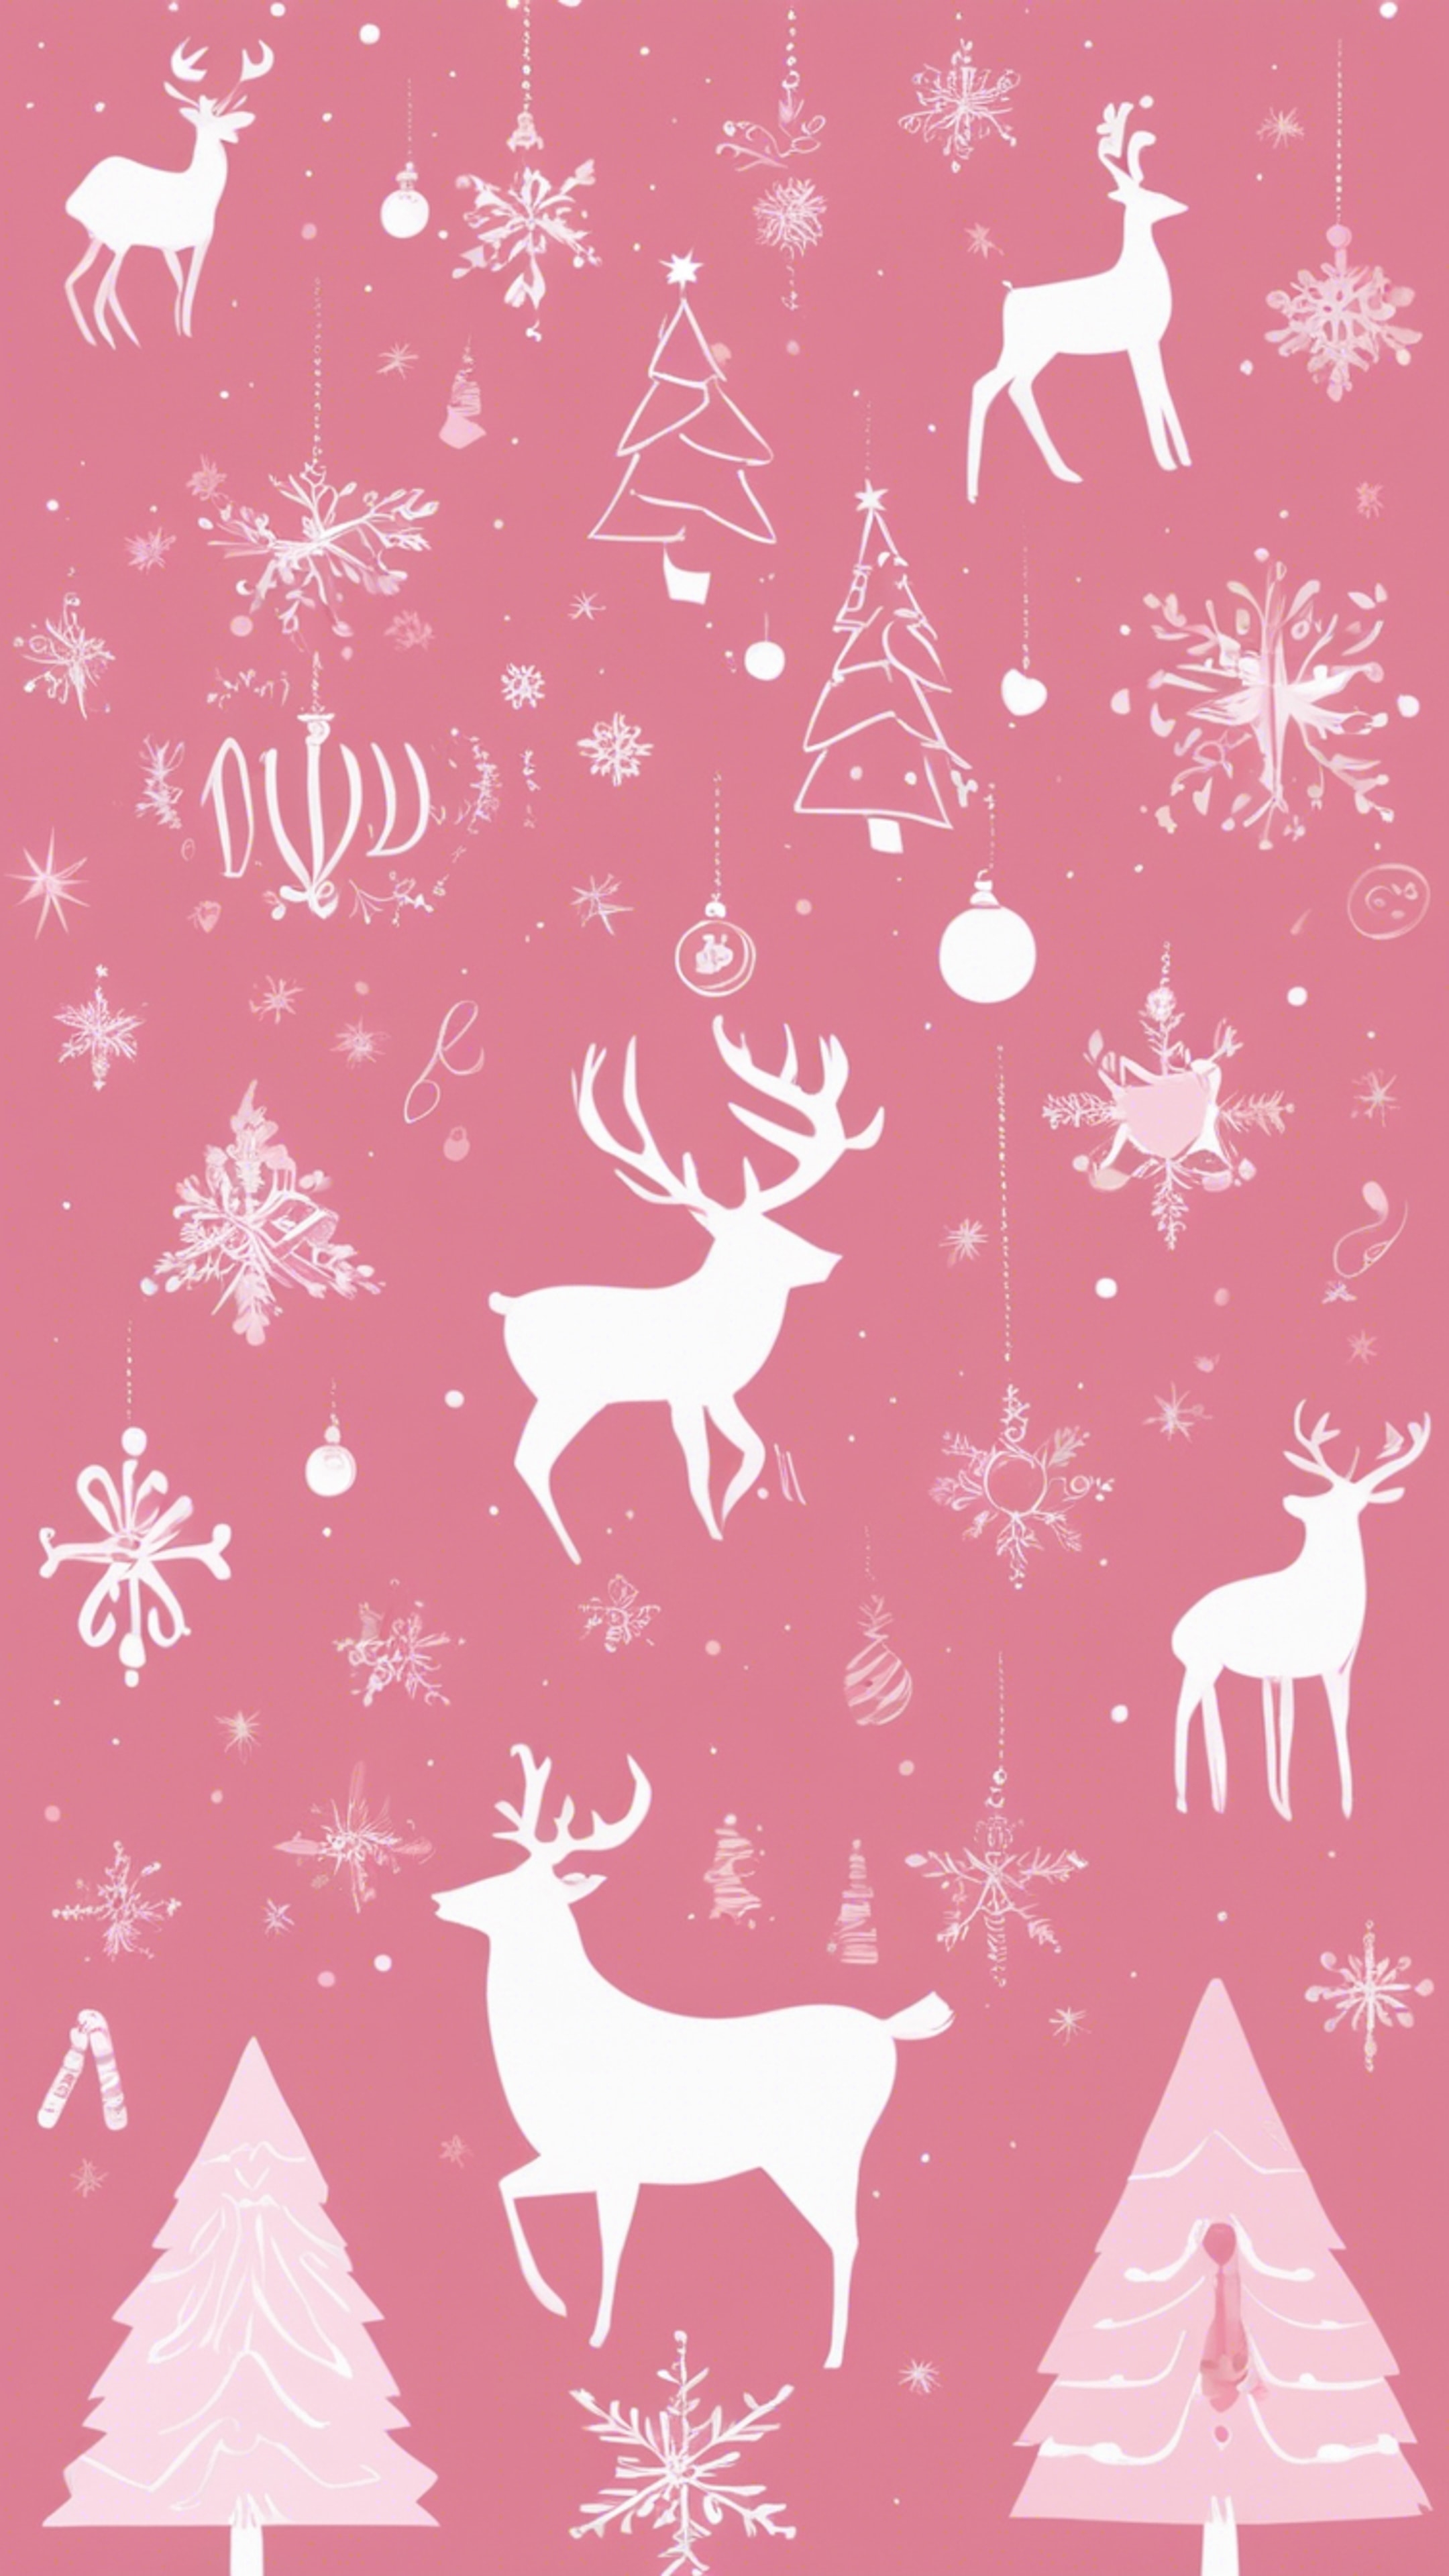 A minimally designed Christmas card with elegant pink illustrations of Christmas icons.壁紙[9459a801713f4624aabe]